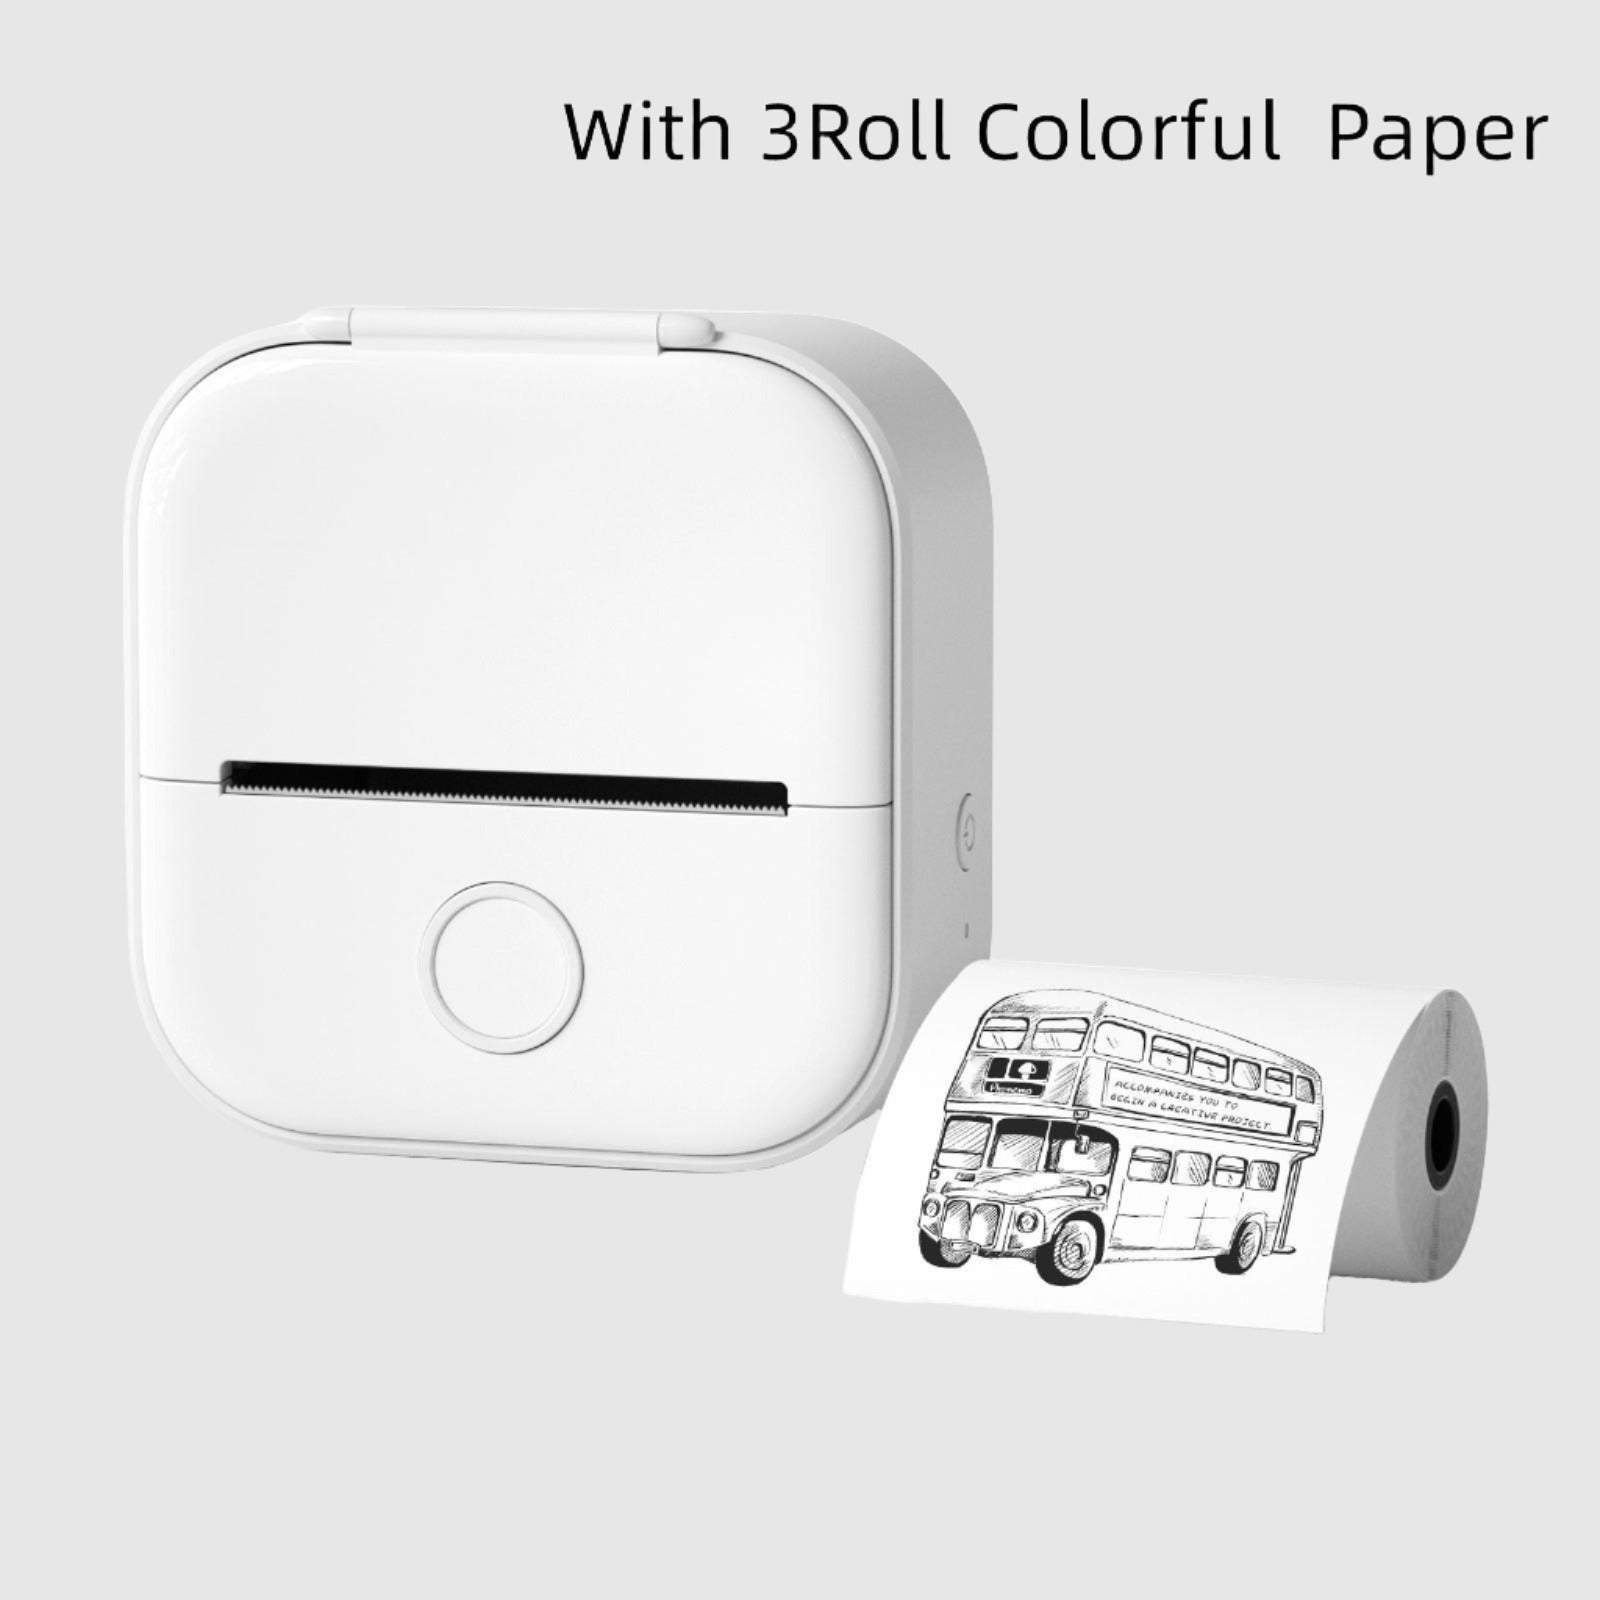 Mini Pocket Small Portable Bluetooth Cell Phone Label Thermal Printer white with paper